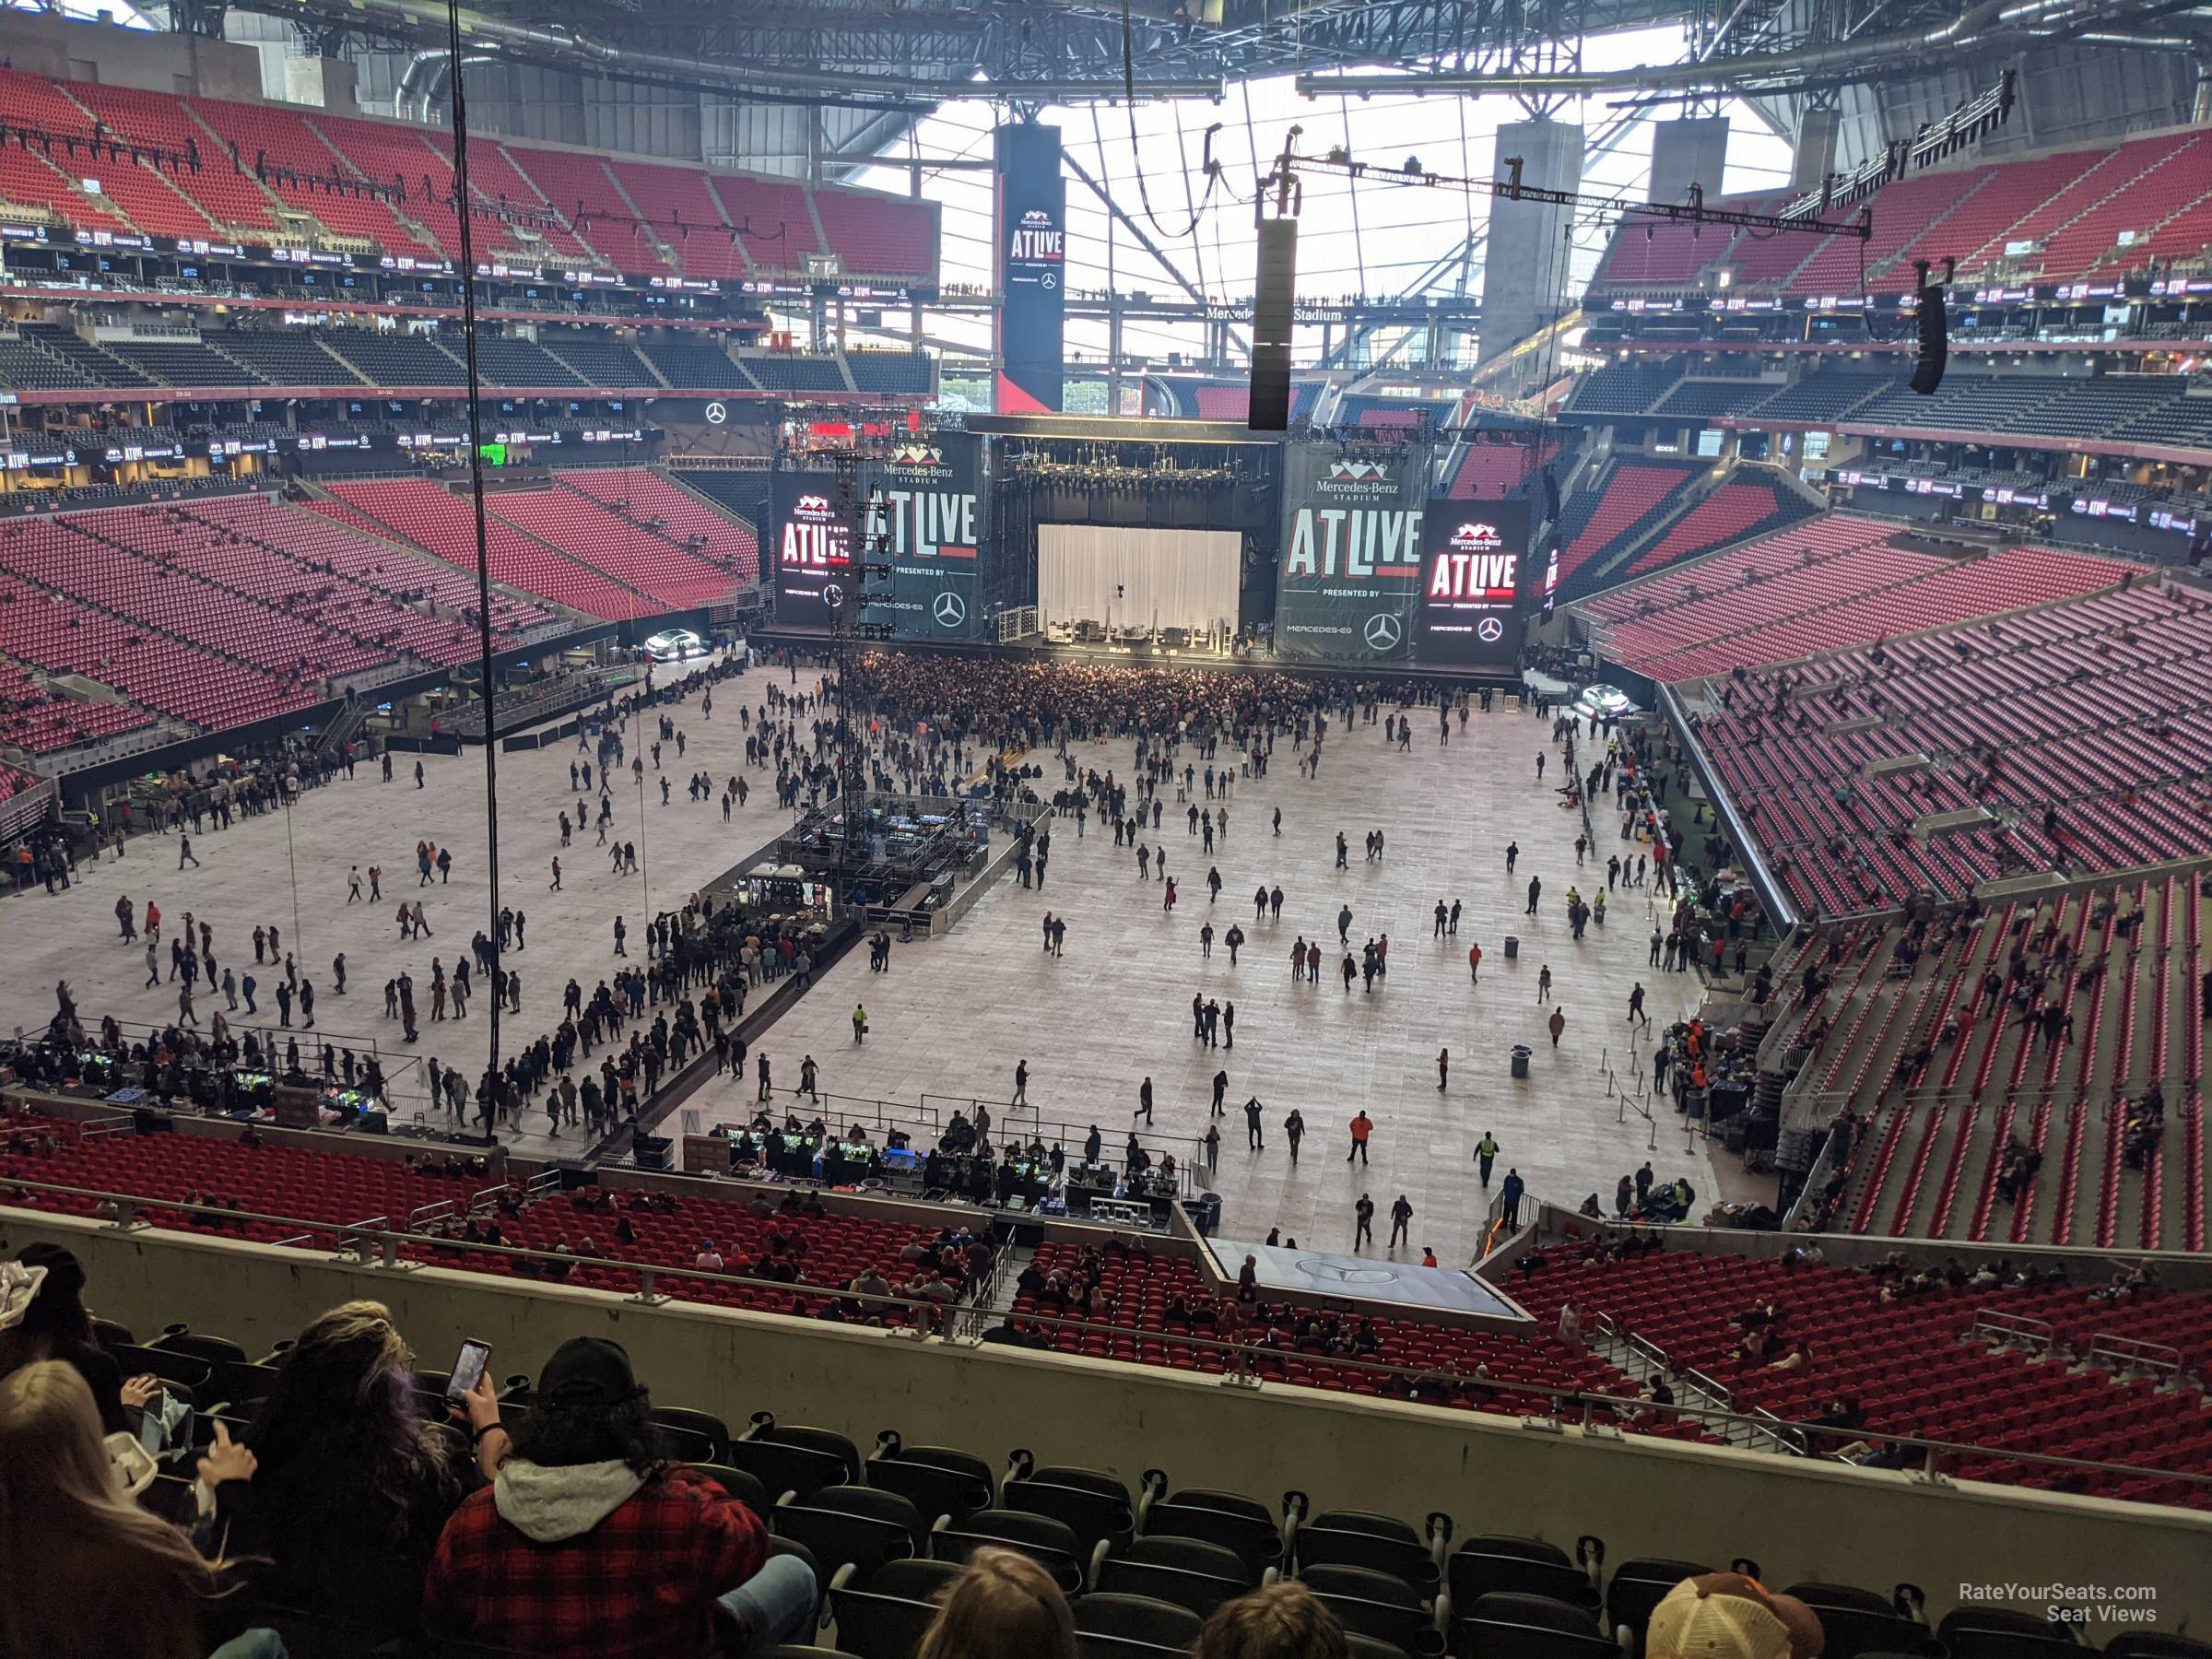 section 222, row 5 seat view  for concert - mercedes-benz stadium